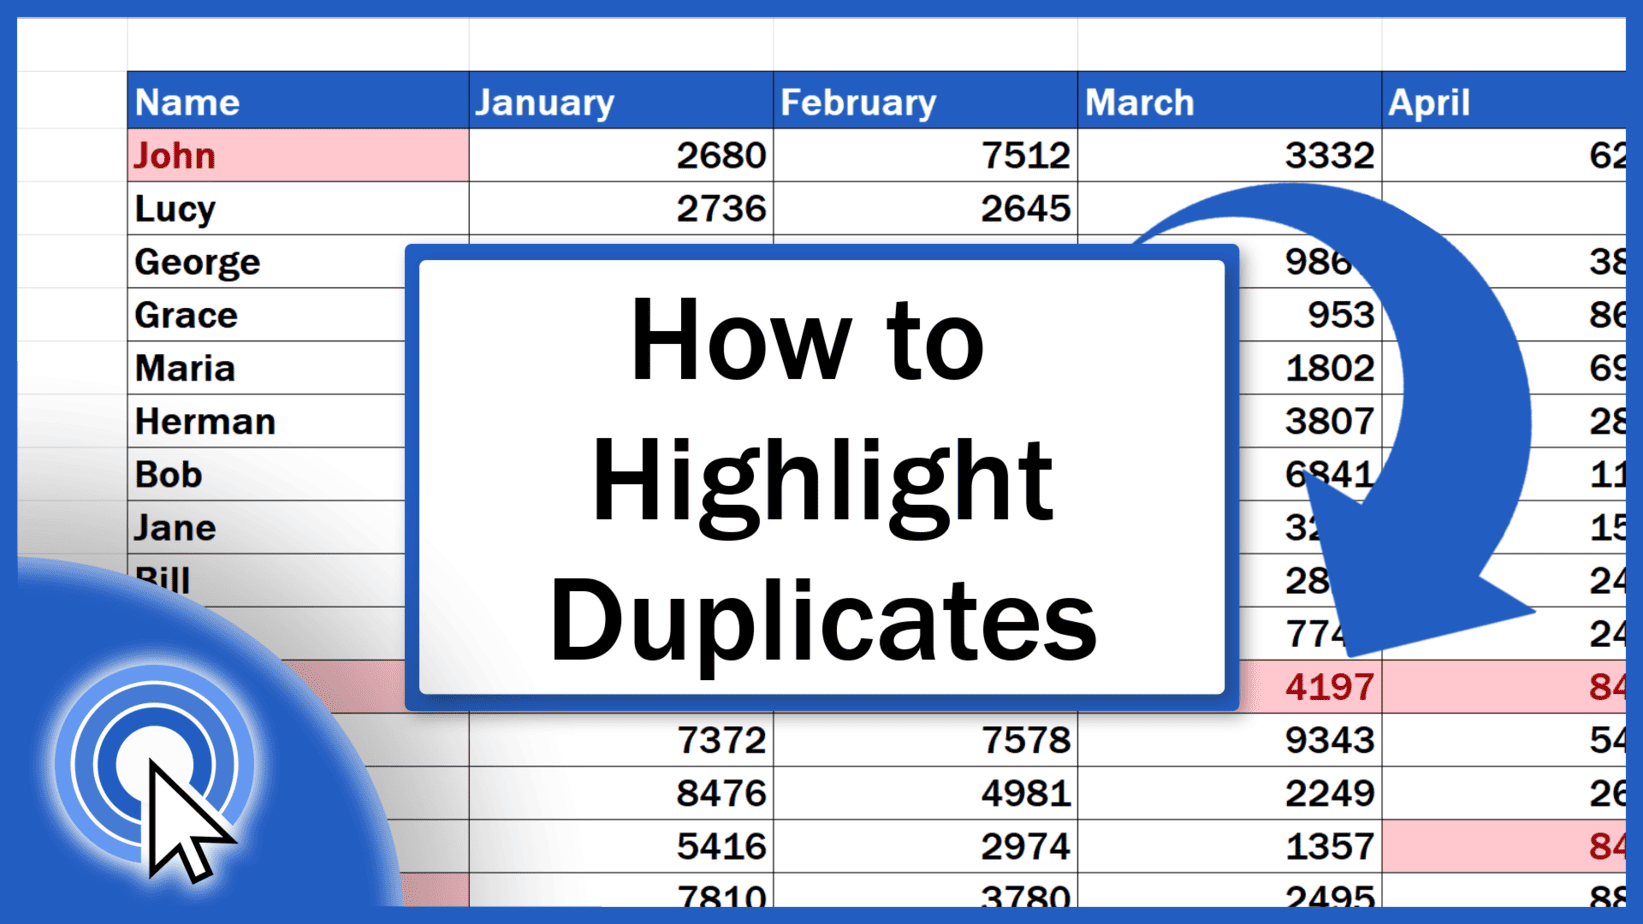 How to Highlight Duplicates in Excel